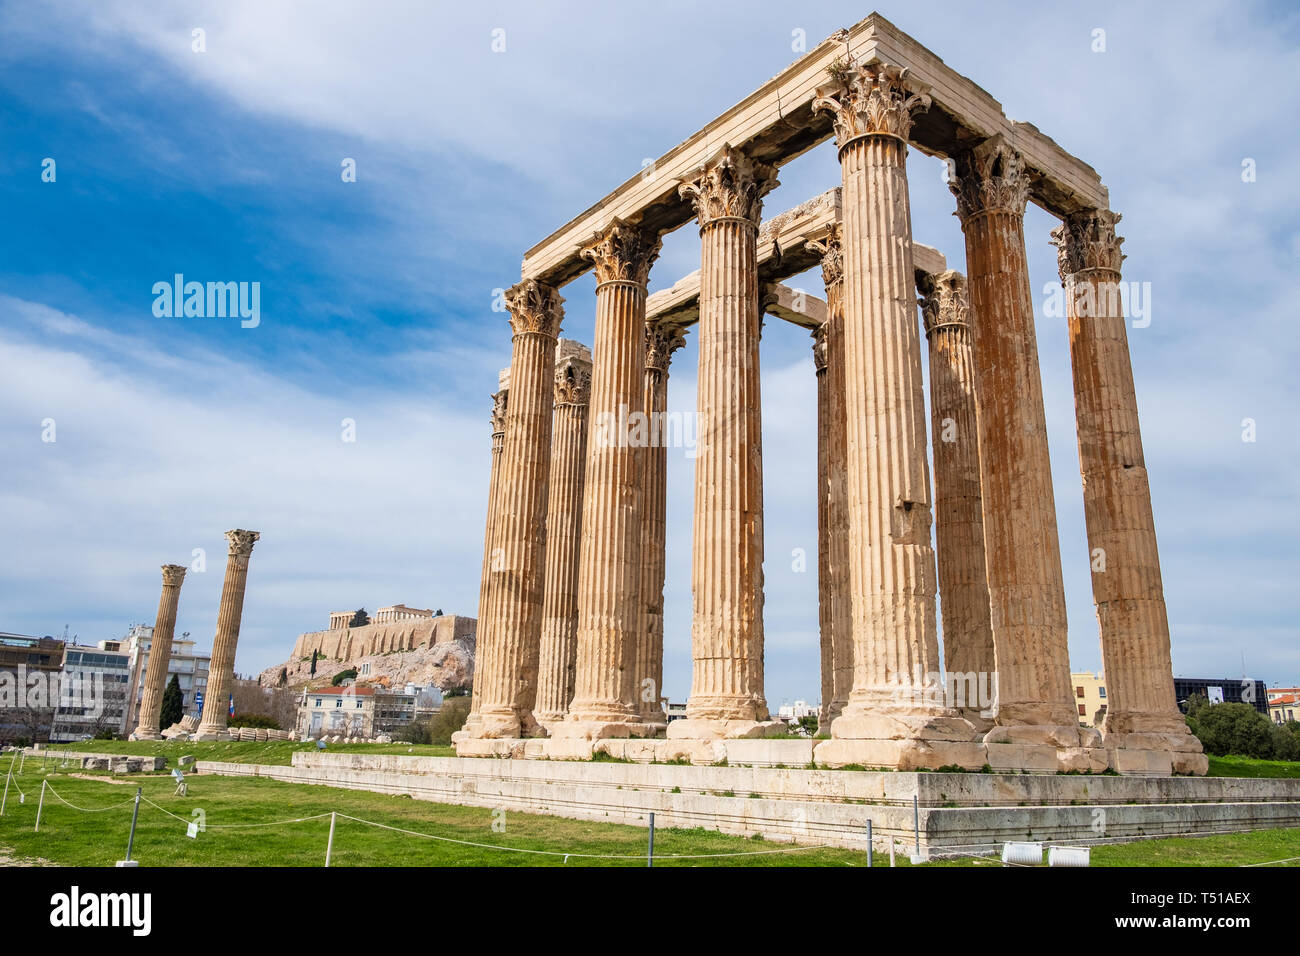 Ruins of the ancient Temple of Olympian Zeus in Athens (Olympieion or Columns of the Olympian Zeus) with Acropolis hill in the background Stock Photo